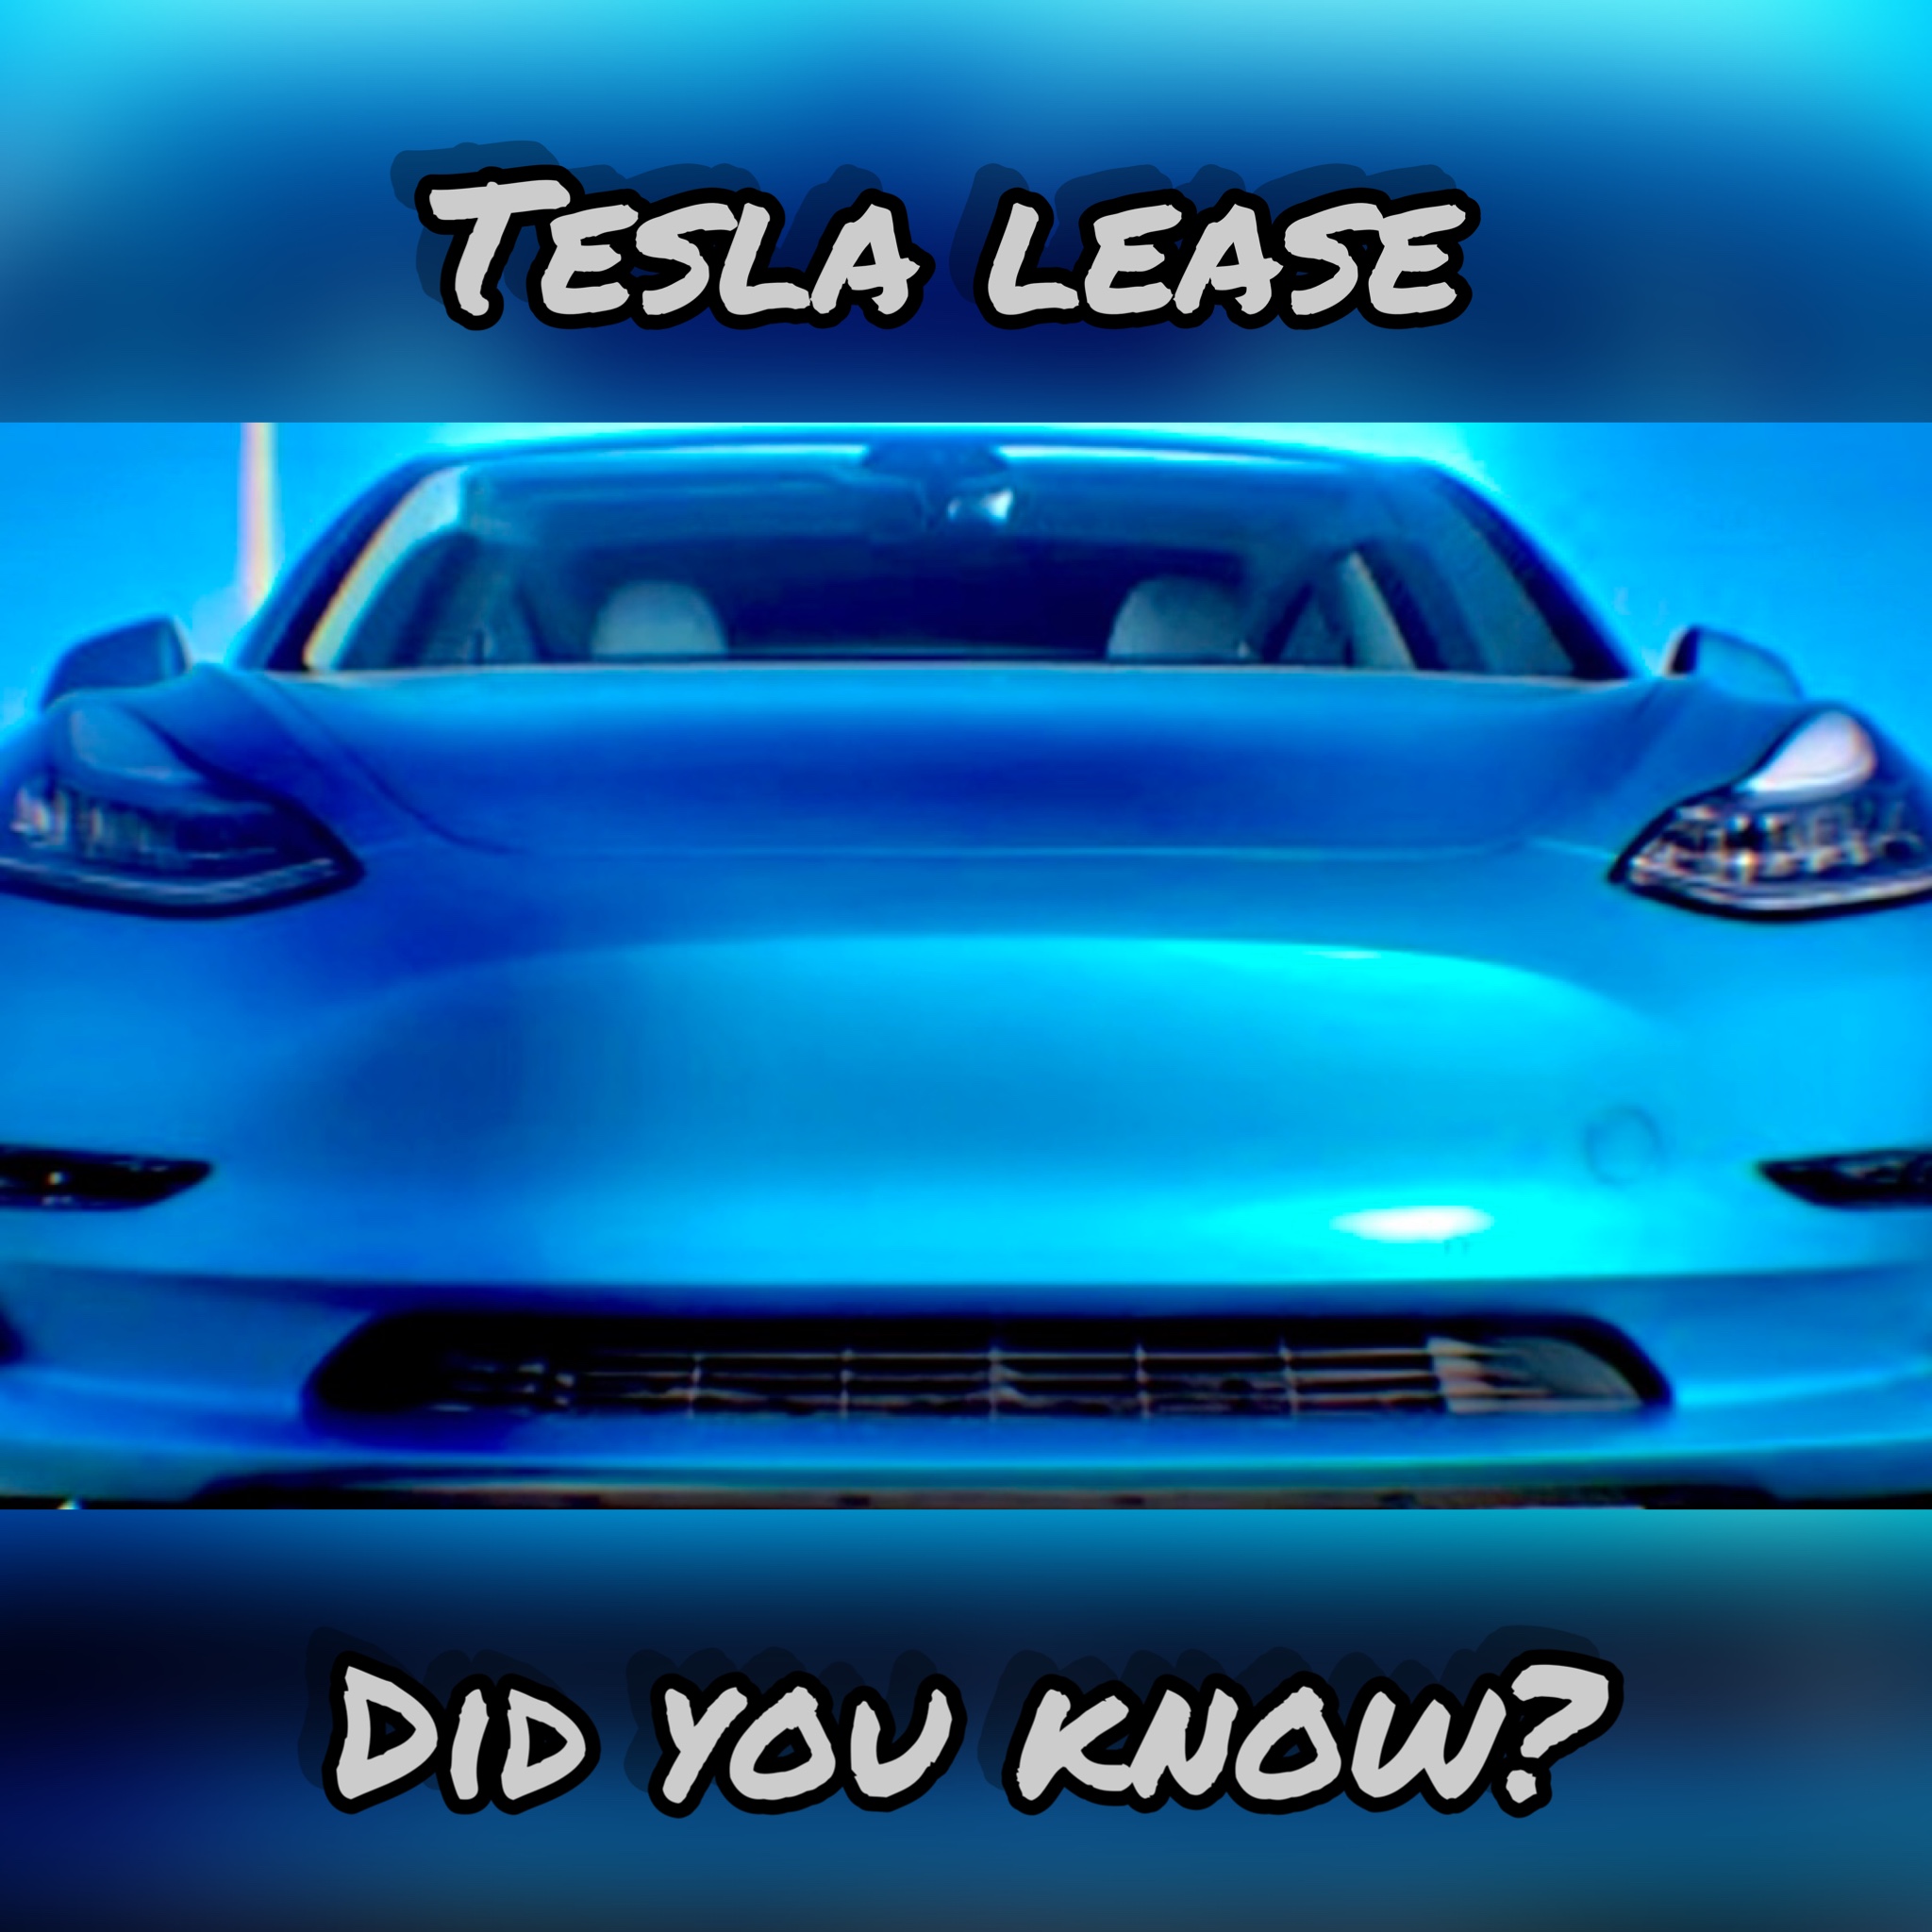 LEASED A TESLA AND WANT TO BUY IT AT END OF THE TERM?  